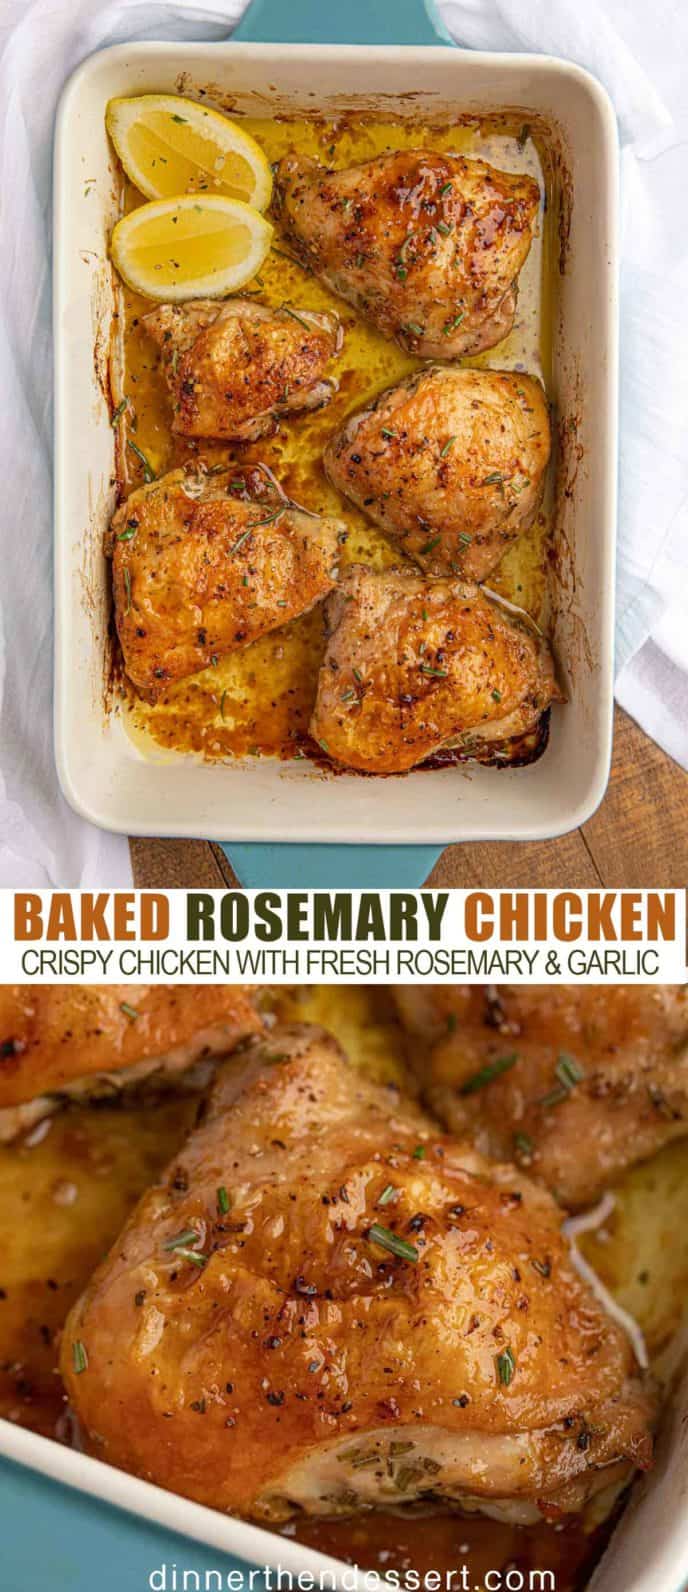 Baked Rosemary Chicken in a blue pan